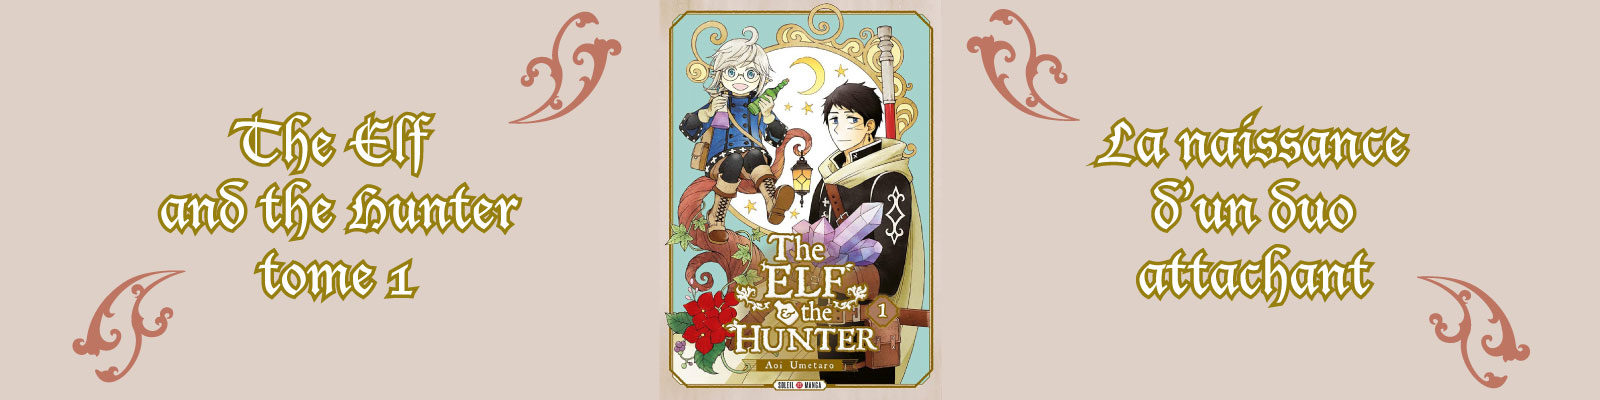 The Elf and the Hunter-1